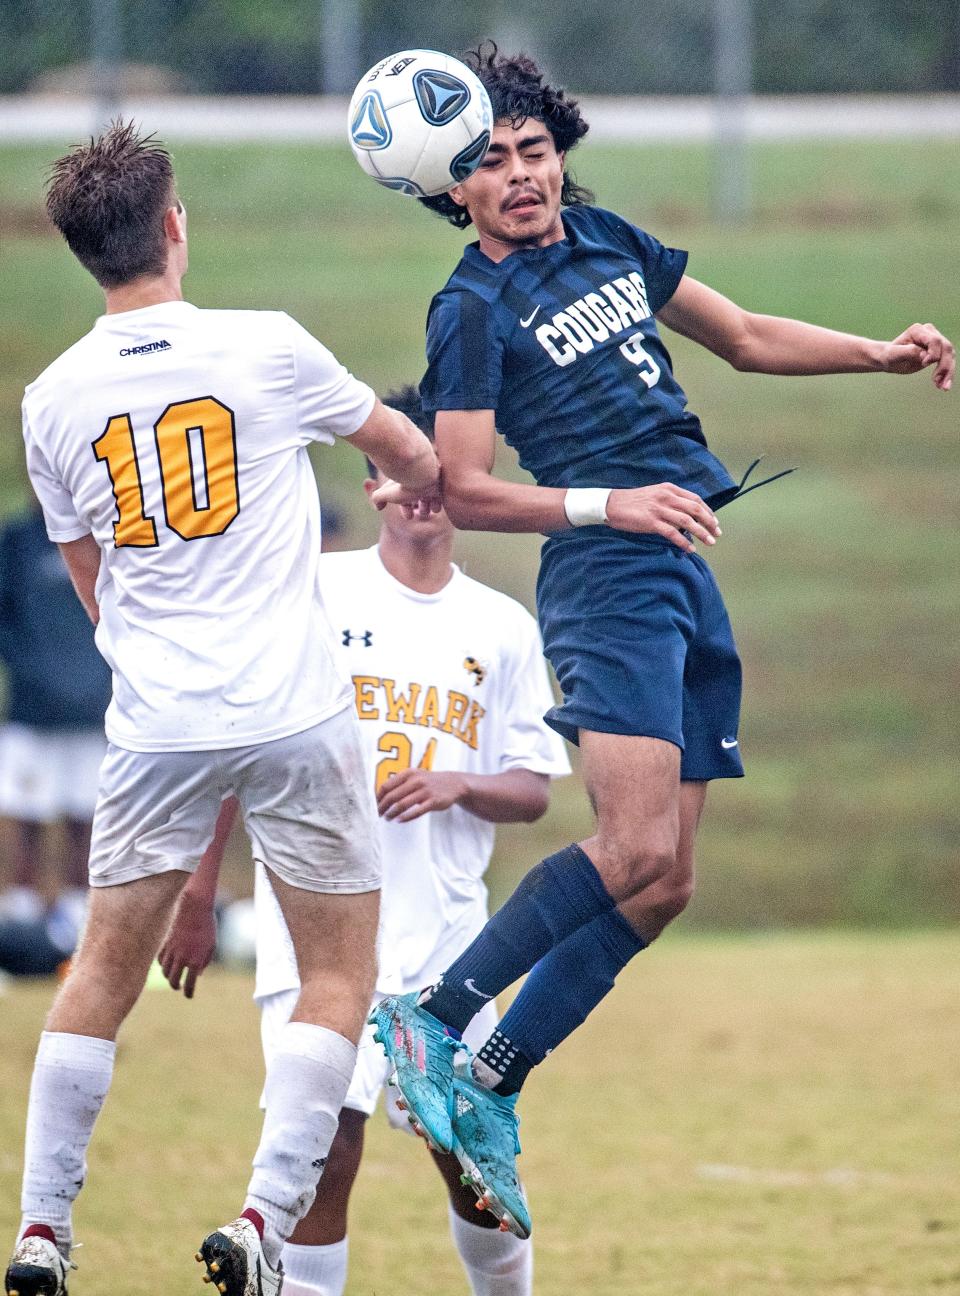 Delcastle Cougars Cristofer Torres-Romero (9) goes up for a header against Newark Yellow Jackets Seth Fuhr (10) during the boys soccer game at Delcastle in Belvedere, Thursday, Oct. 13, 2022. Delcastle won 4-1.